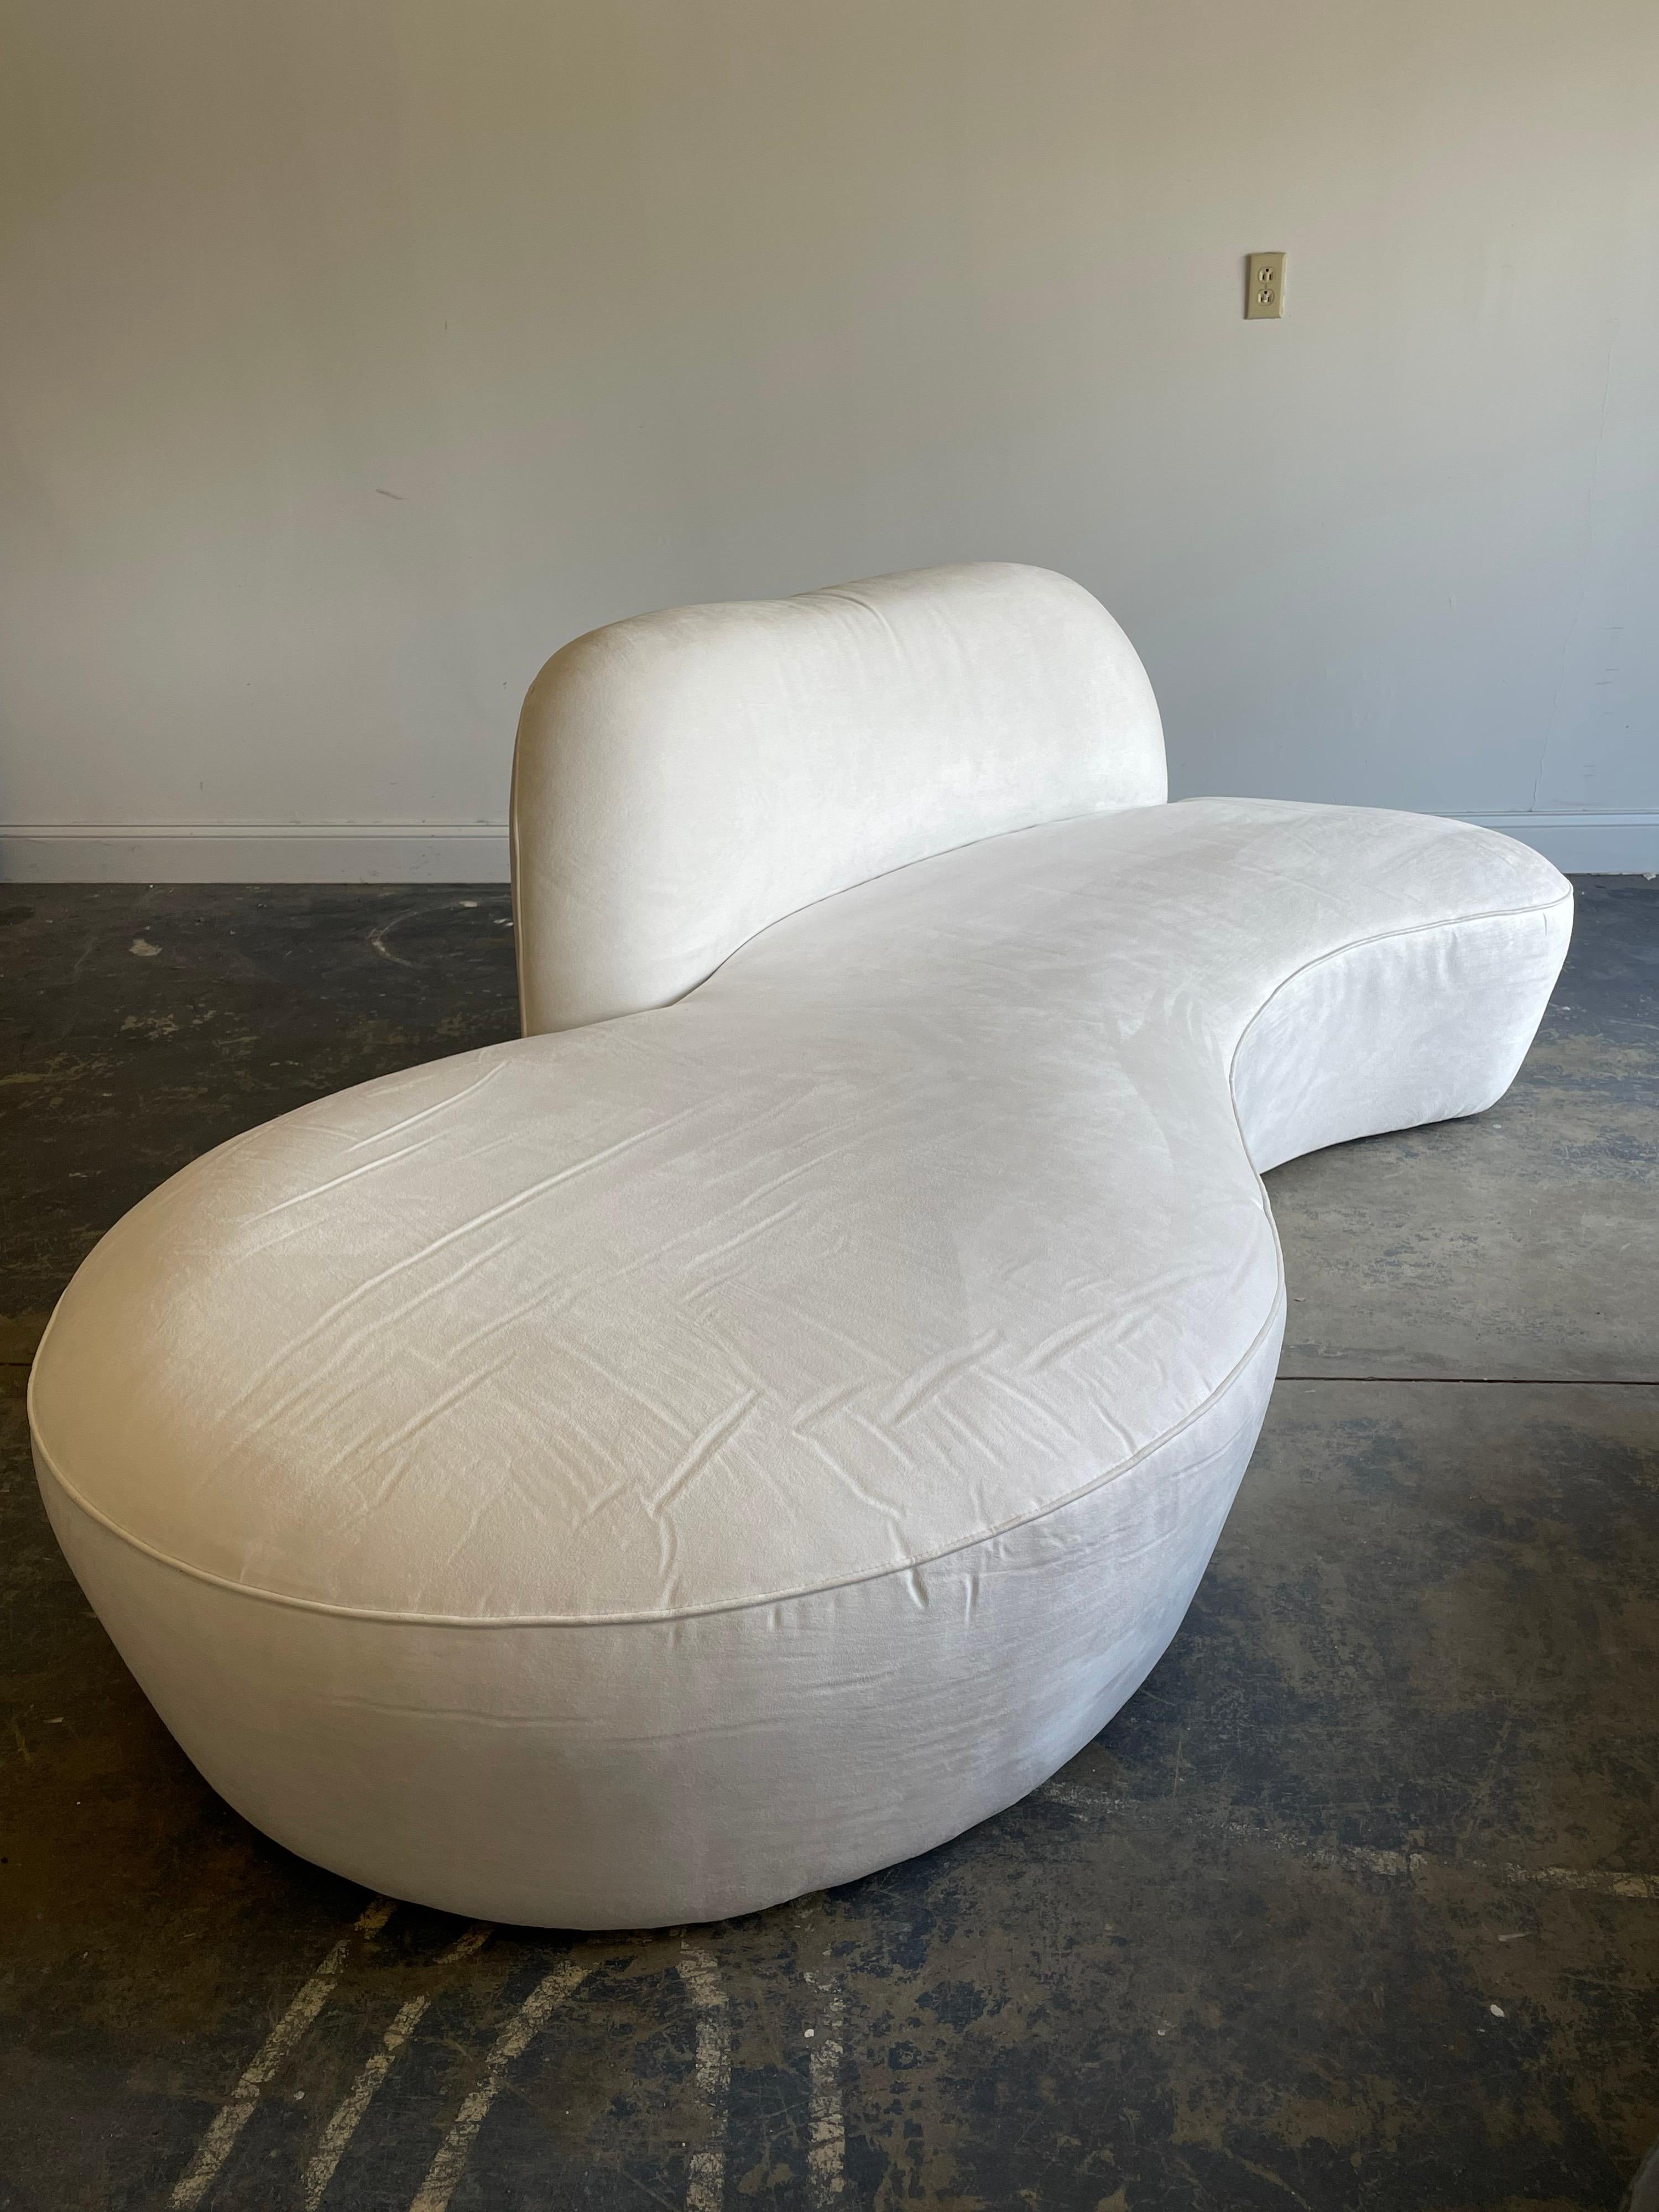 A classic cloud or serpentine sofa designed by Vladimir Kagan for American Leather. Currently in the original microfiber suede upholstery. 

Please note dimensions listed as overall dimensions.

Would work well in a variety of interiors and blend